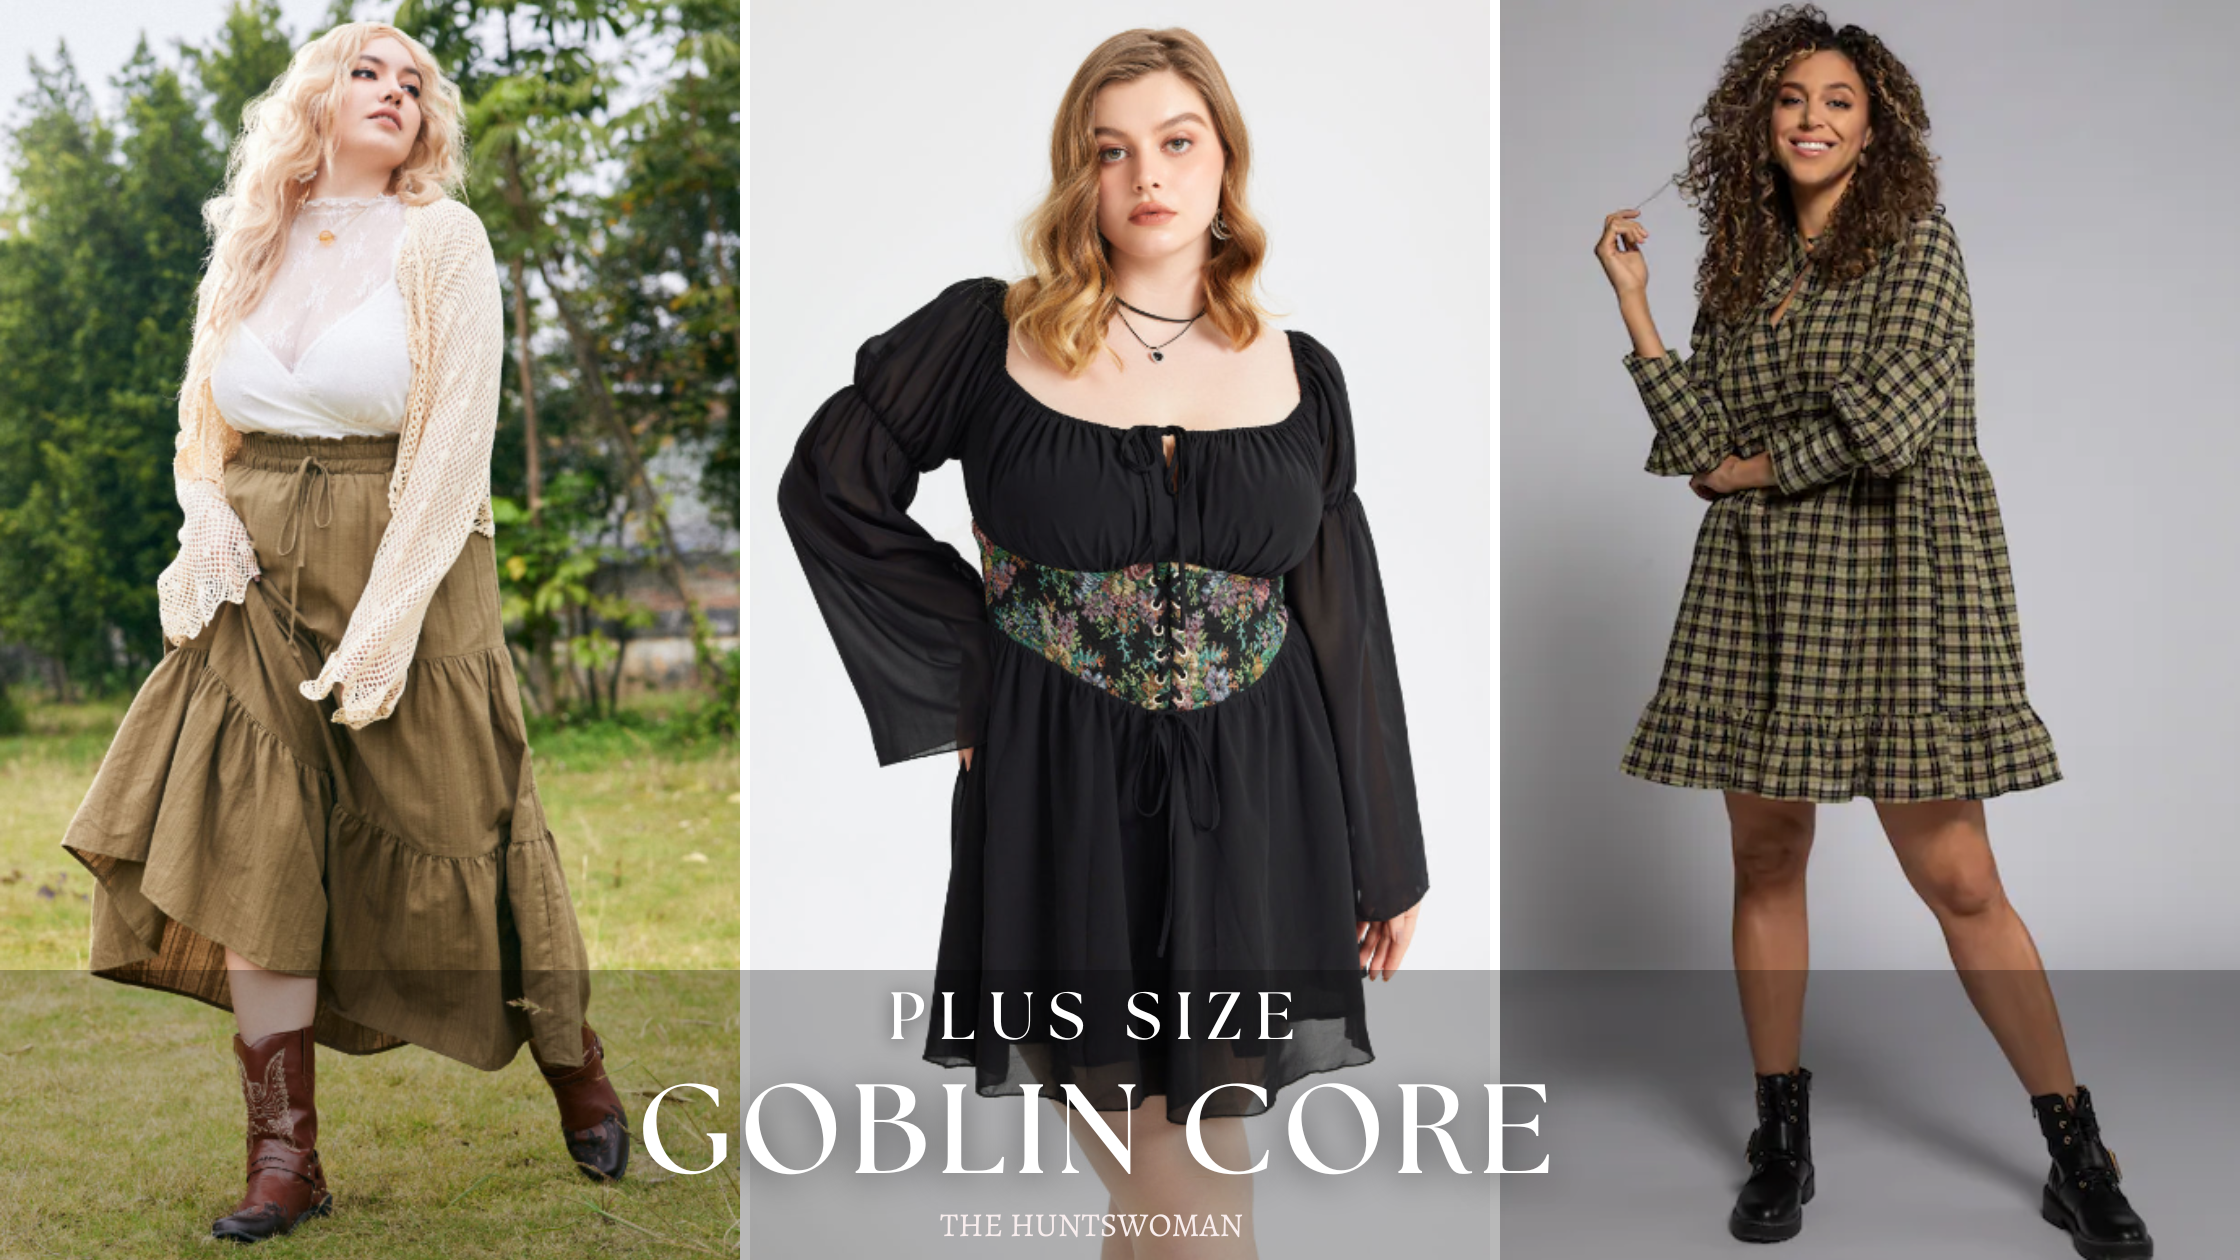 7 Goblincore Outfit Ideas to Master the Whimsical Aesthetic